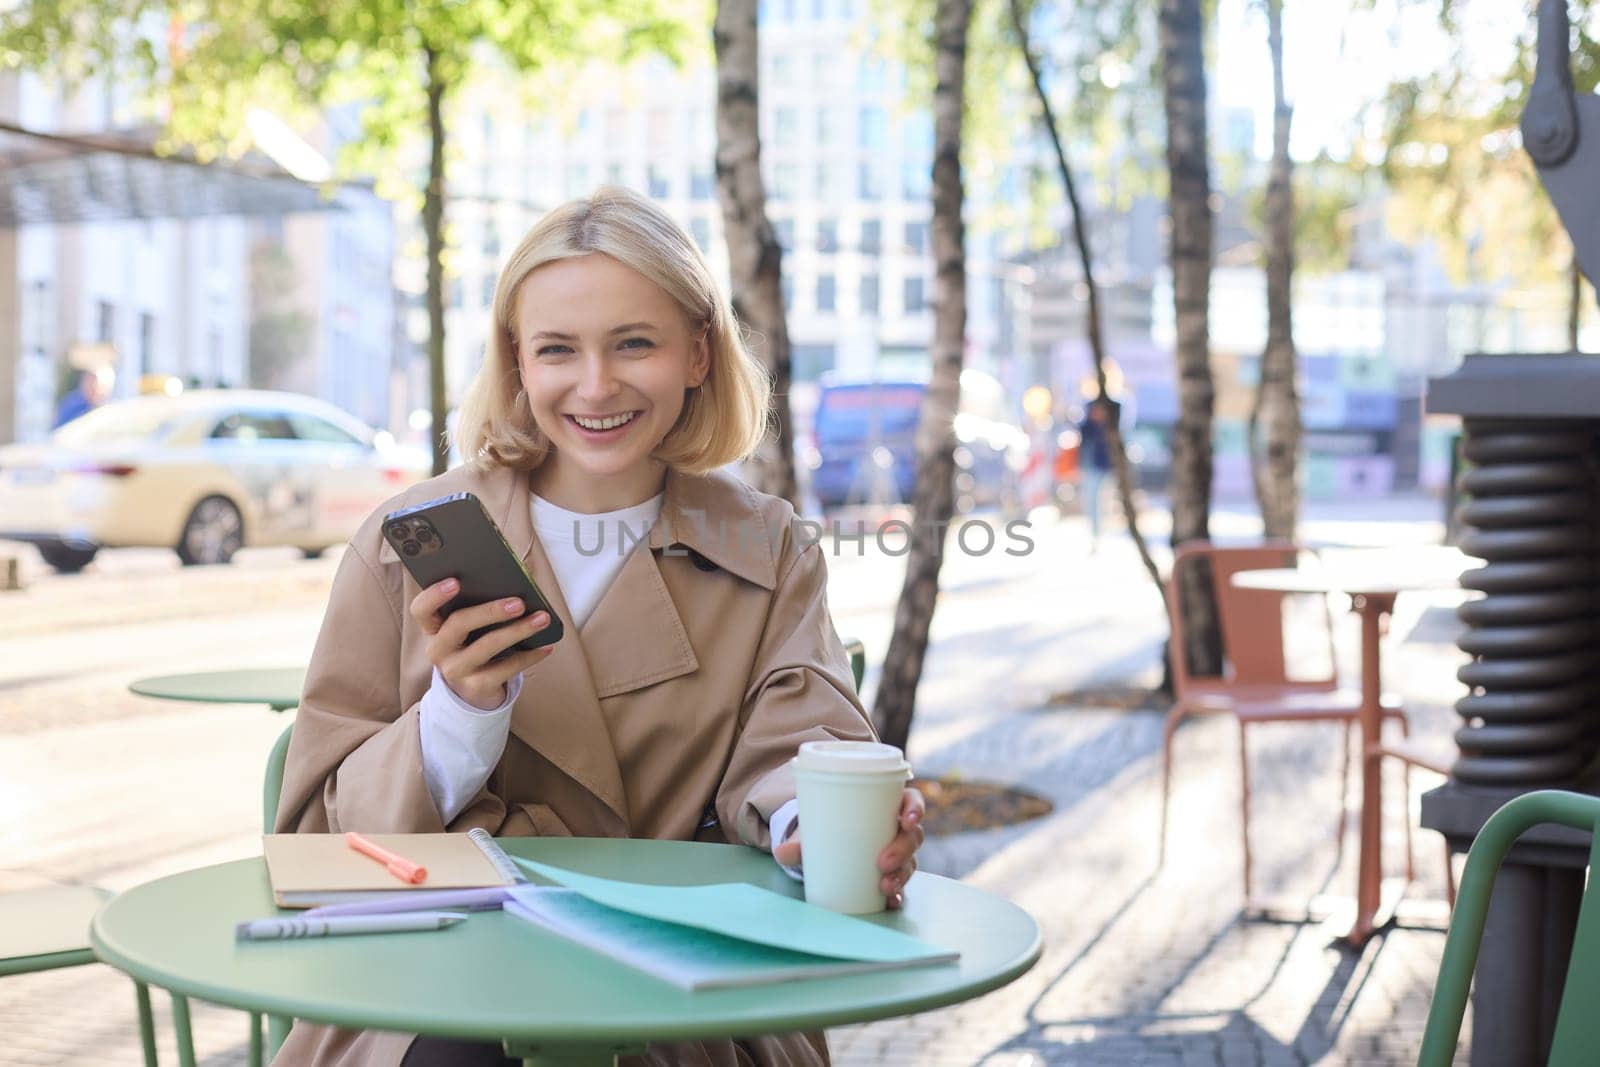 Portrait of blond smiling woman with smartphone, holding cup of coffee, drinking chai and enjoying sunny day outdoors in city centre by Benzoix